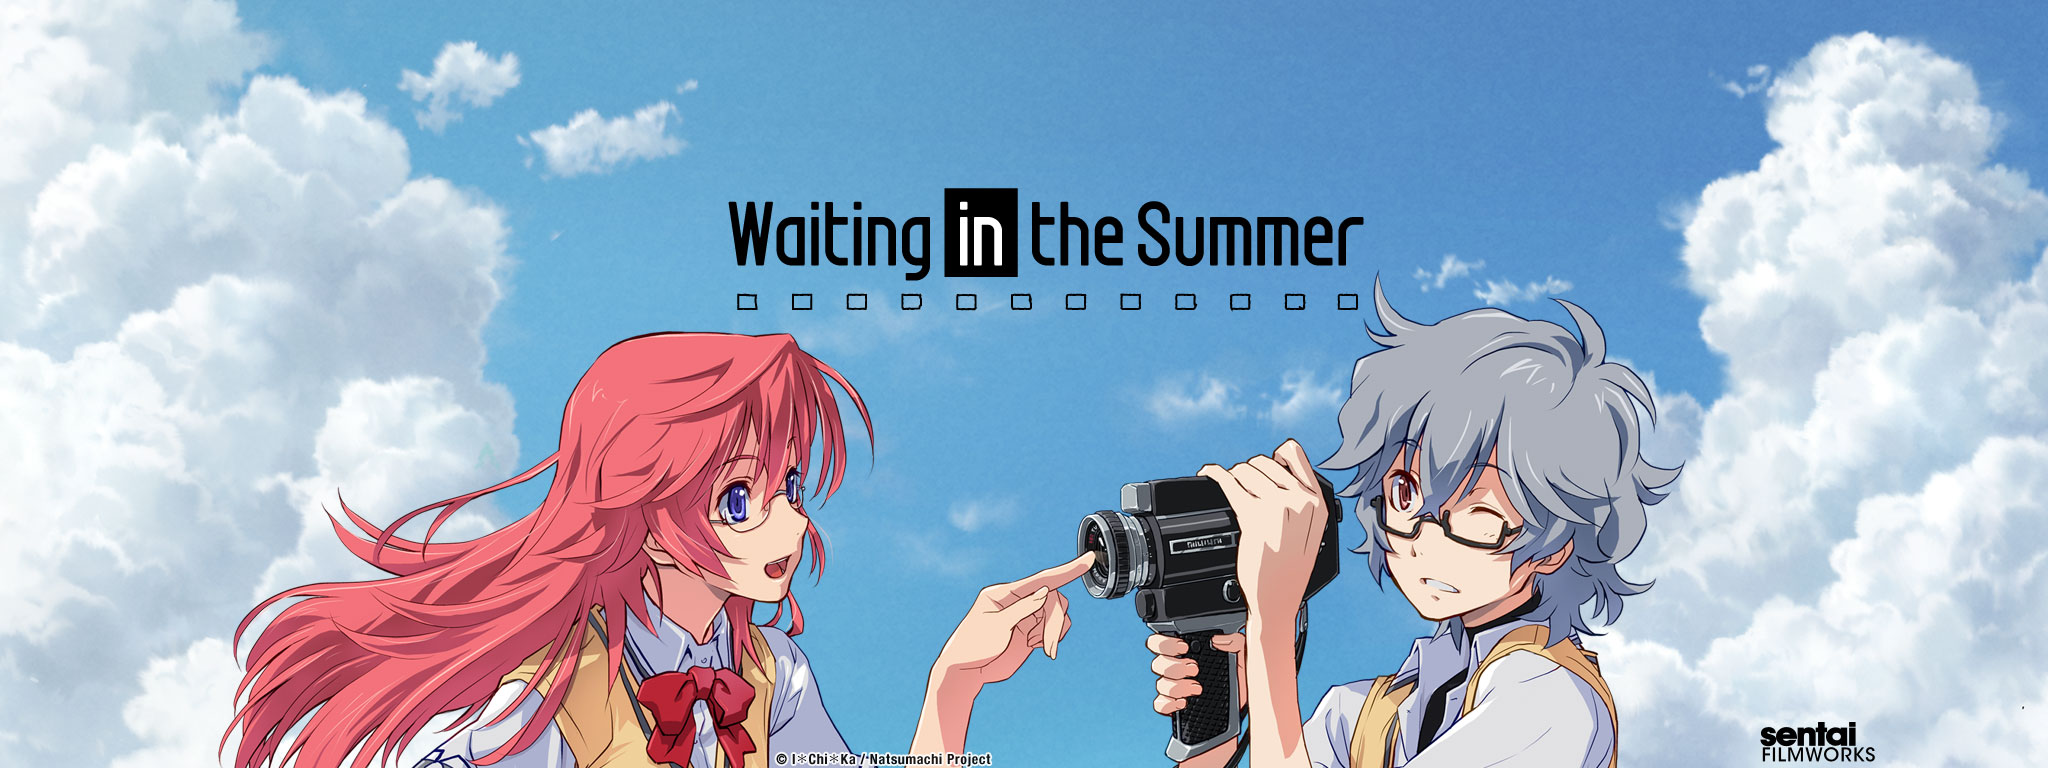 Title Art for Waiting in the Summer